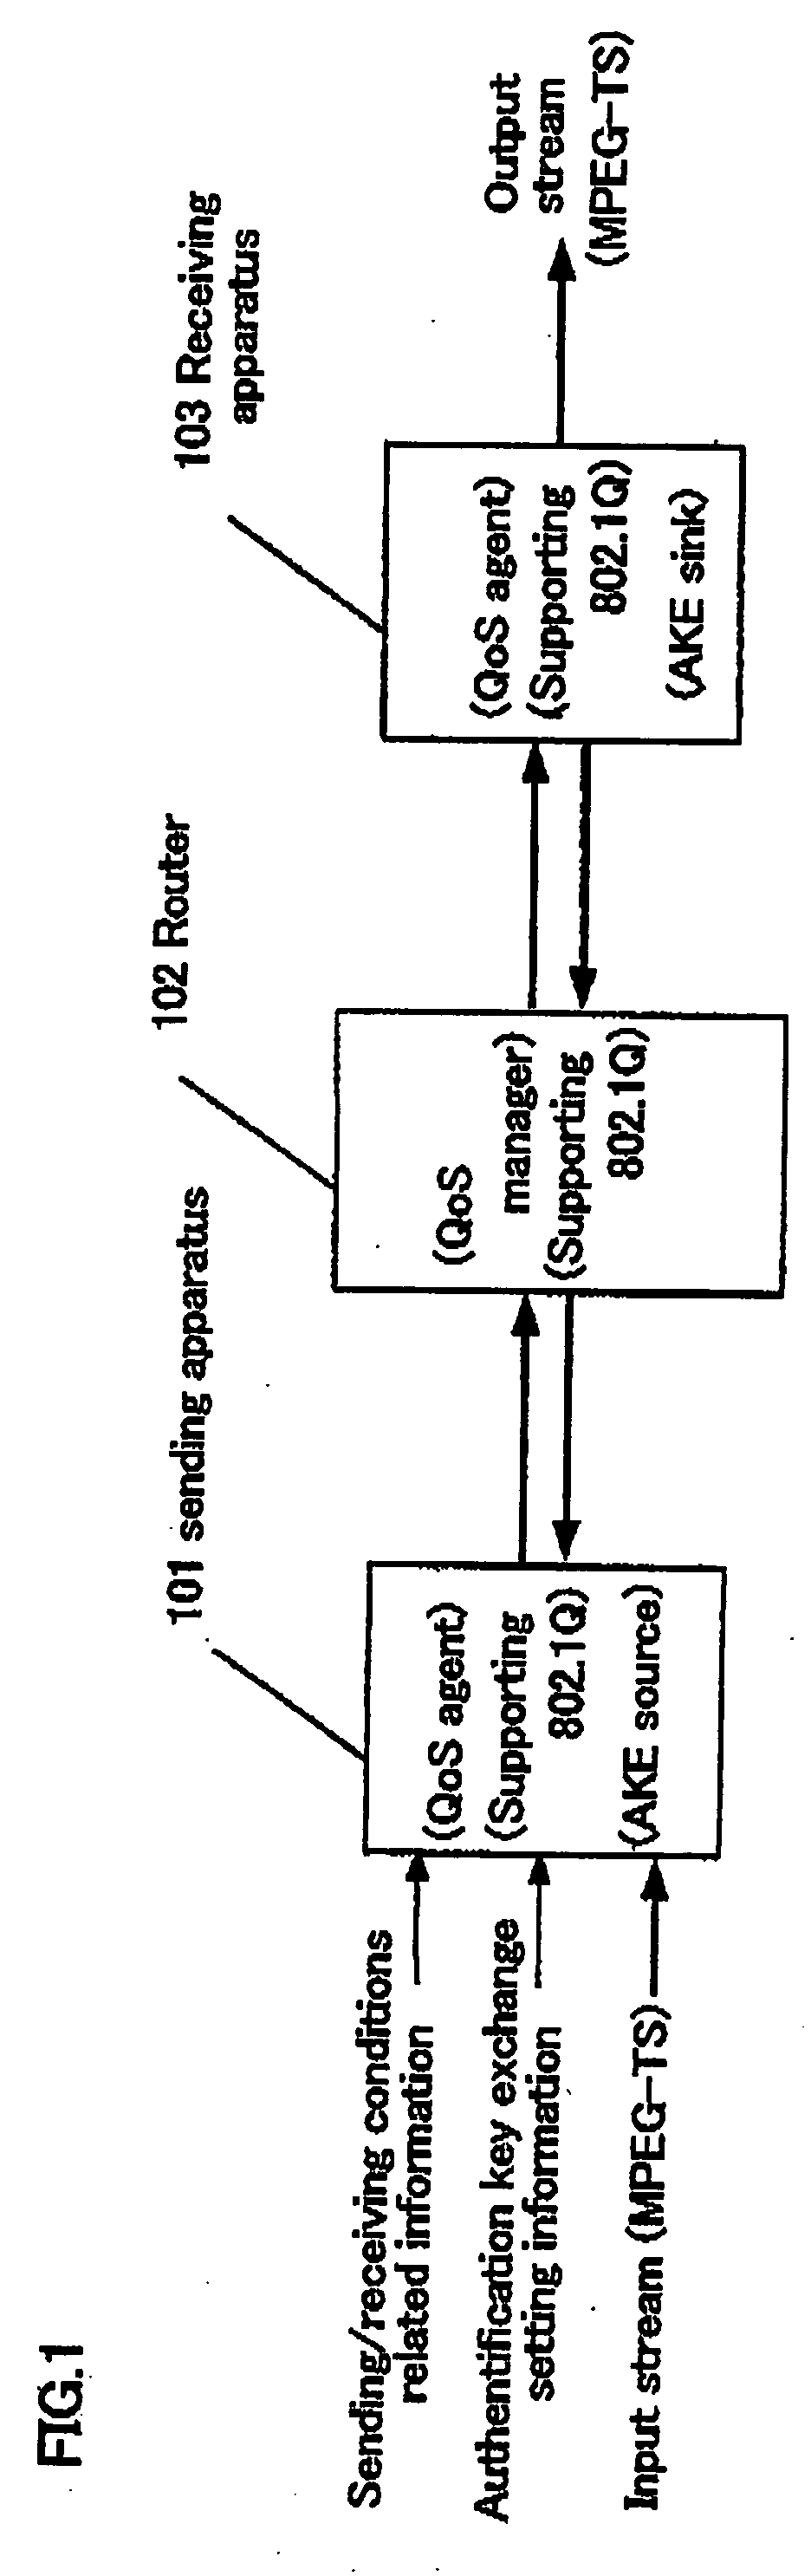 Packet transmission/reception device